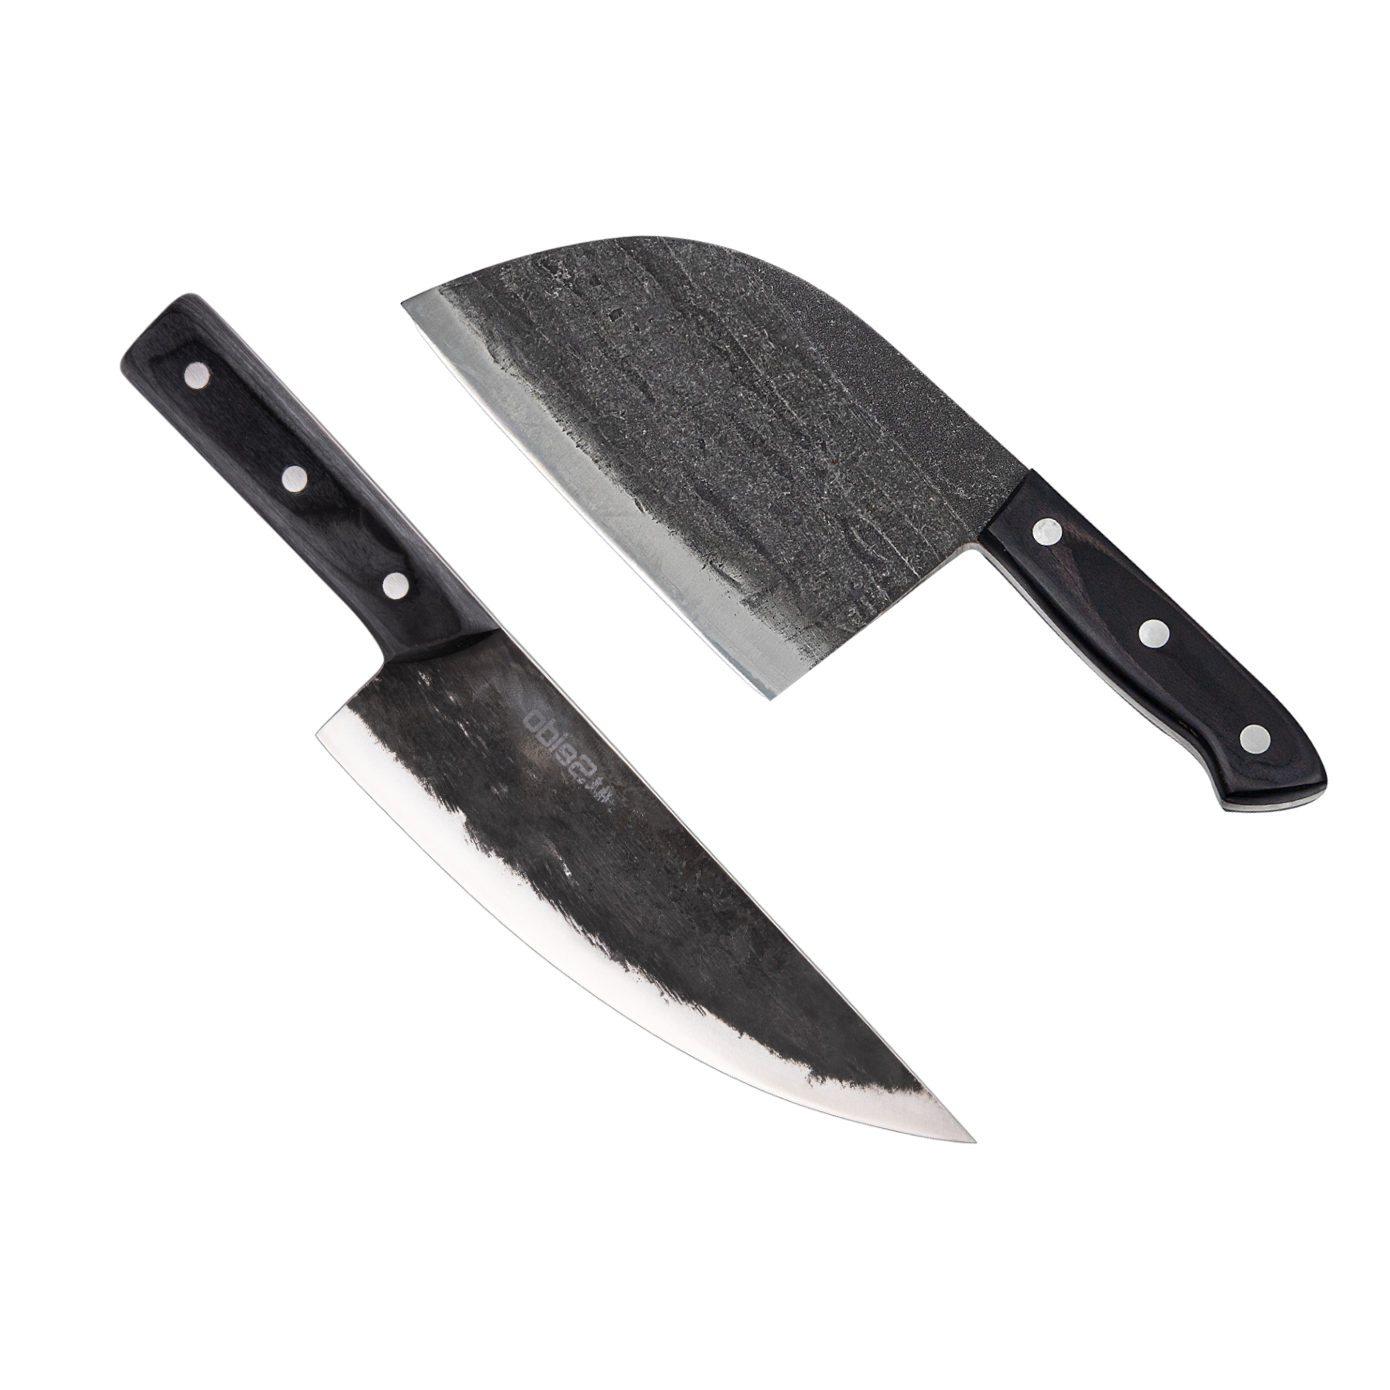 Butcher Knives and Cleavers, Choose the Best Japanese Knife Sets